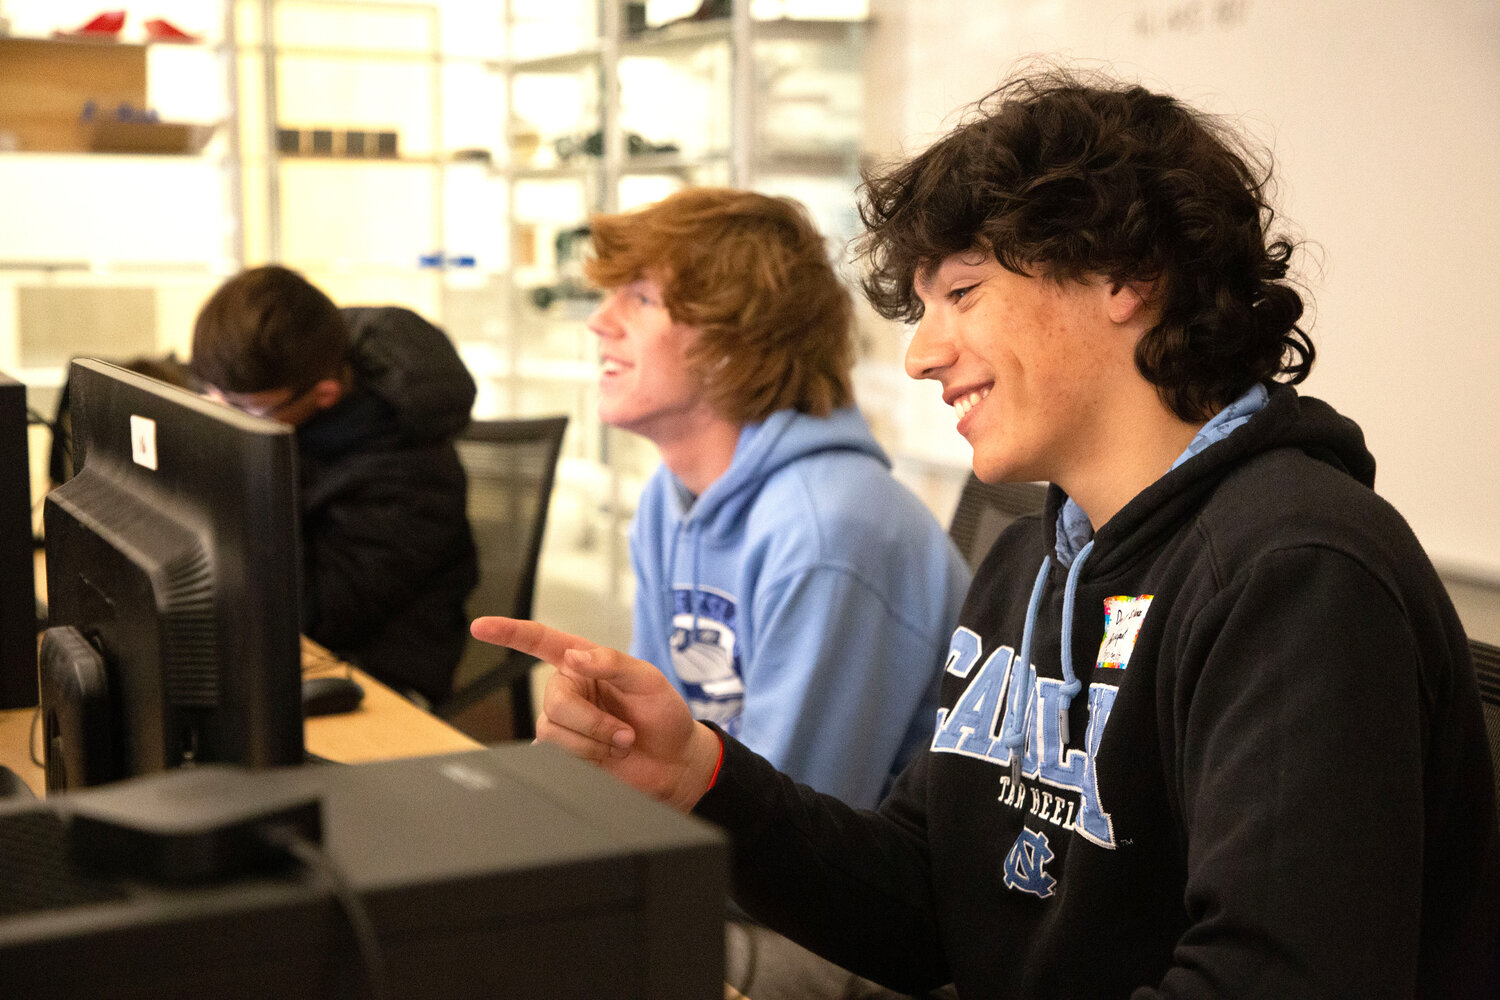 John Vaughan shares a laugh during an engineering class at East Providence High School. In the background are shelves displaying some of the products students have both designed and produced on an array of laser and 3D printers in their Engineering program.